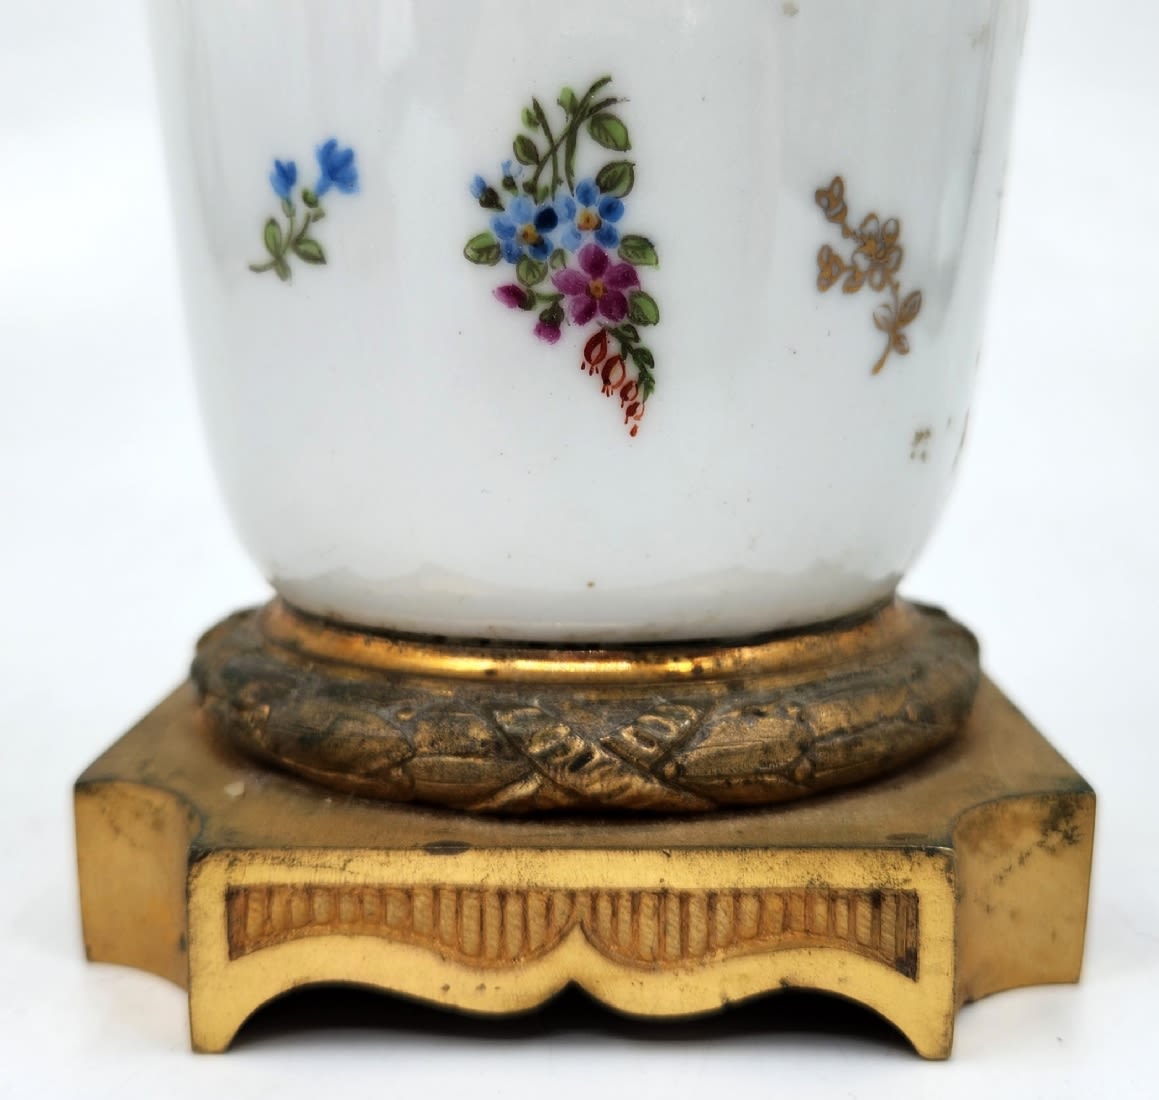 Antique French vase in 'Sevres' style, a beautiful and high-quality antique French vase from the - Image 9 of 12